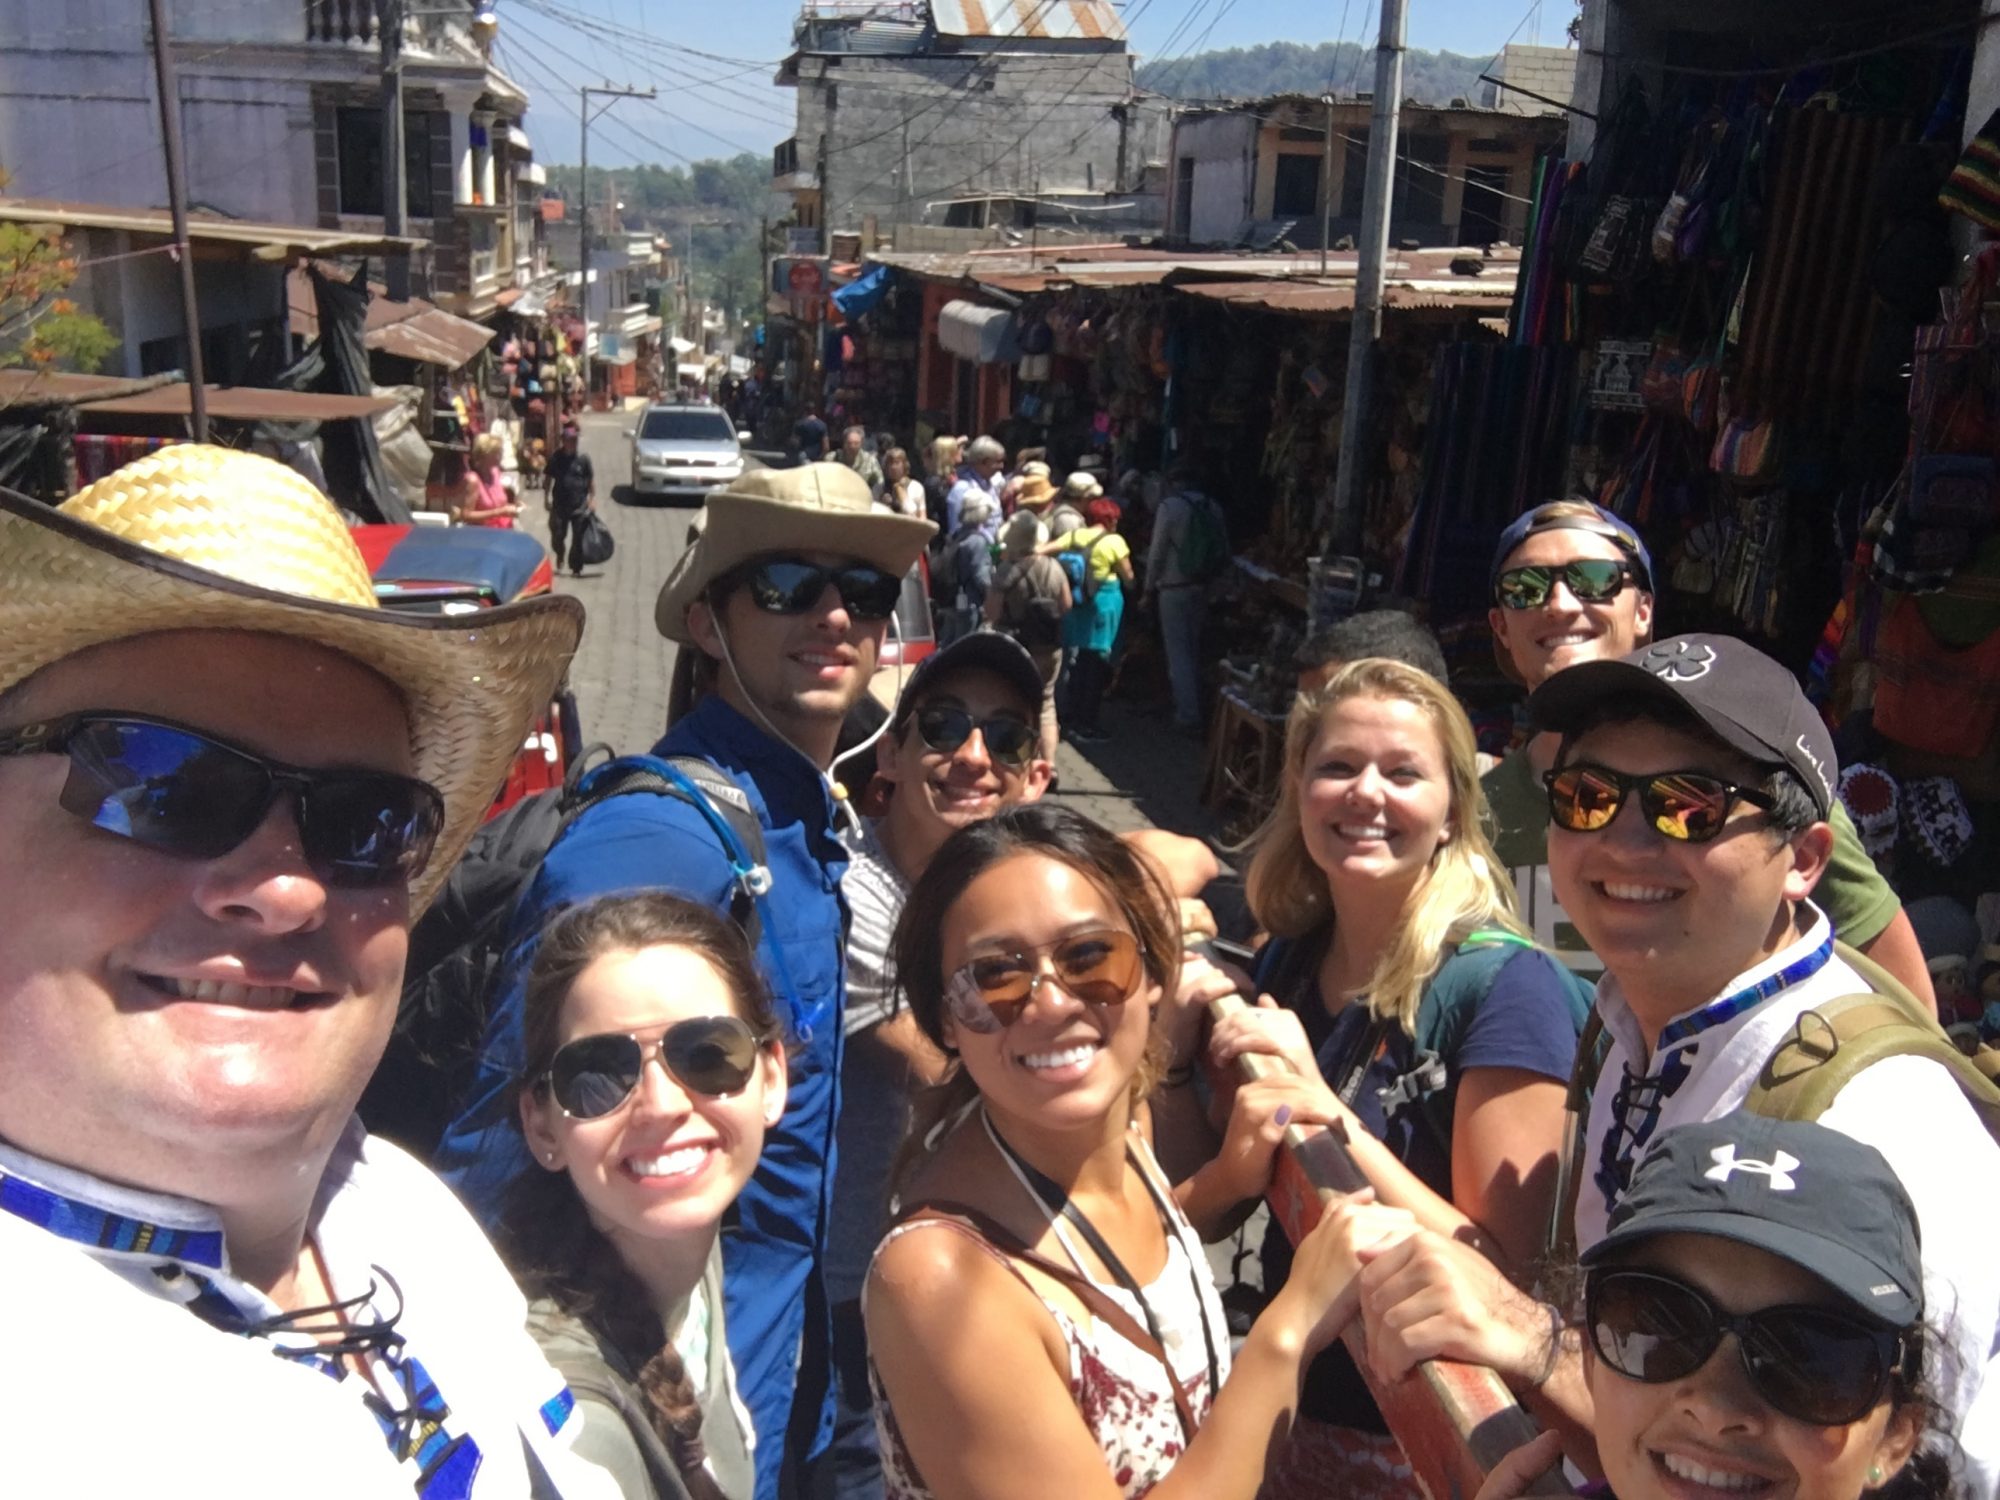 Check out the Eccles Ambassador's Guatemala adventures